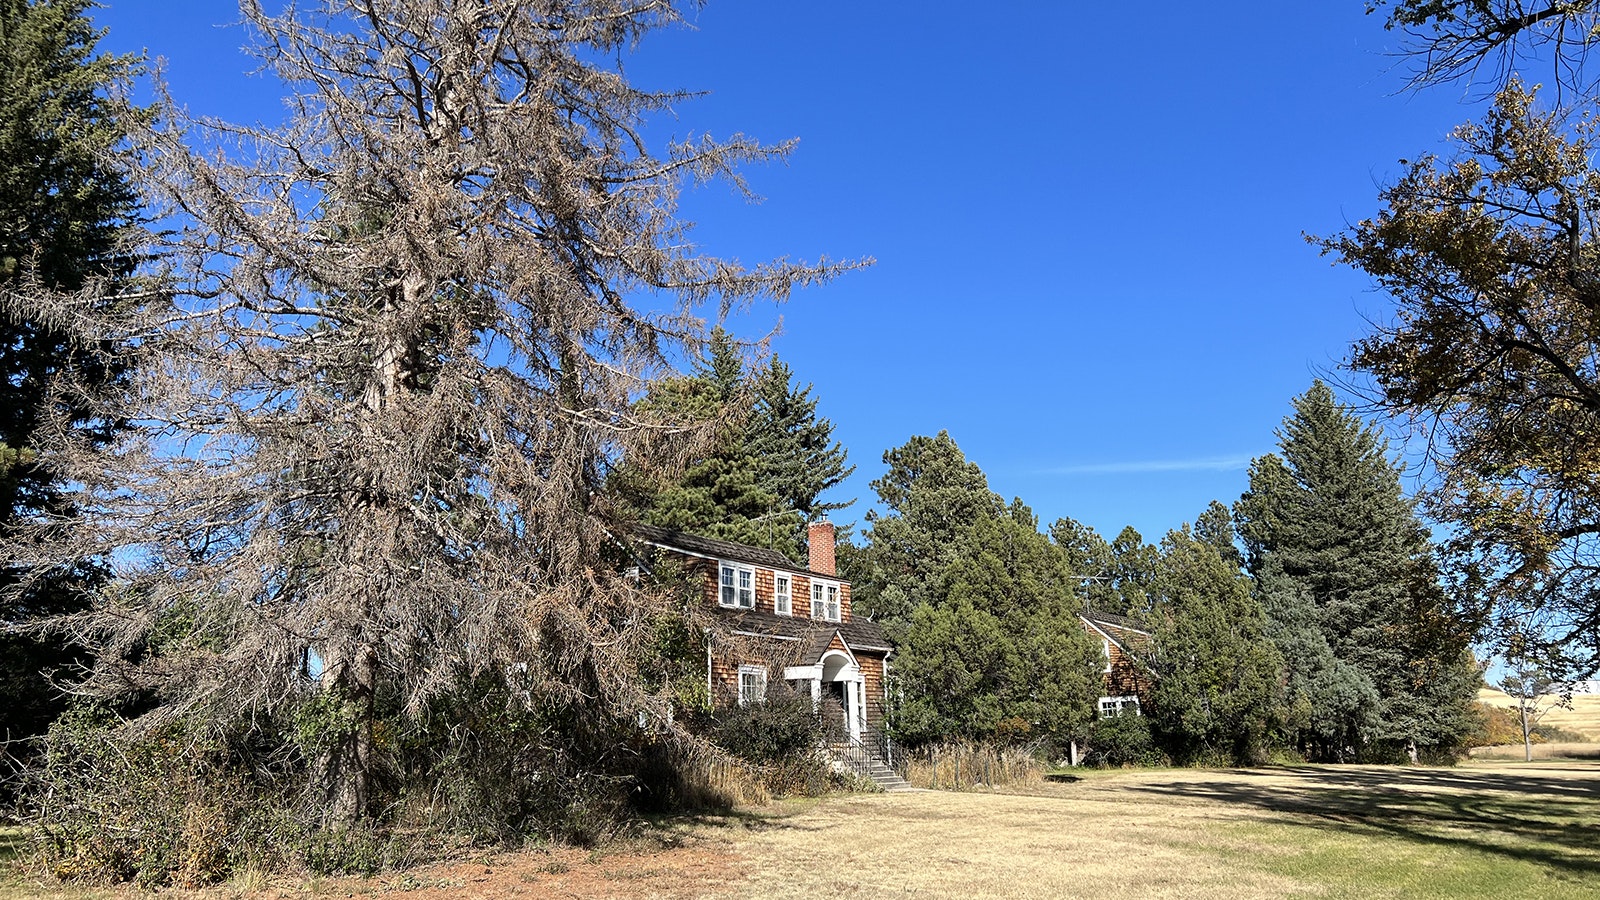 Some of the Cheyenne area's oldest trees are still growing near some of the city's oldest homes near the High Plains Arboretum.